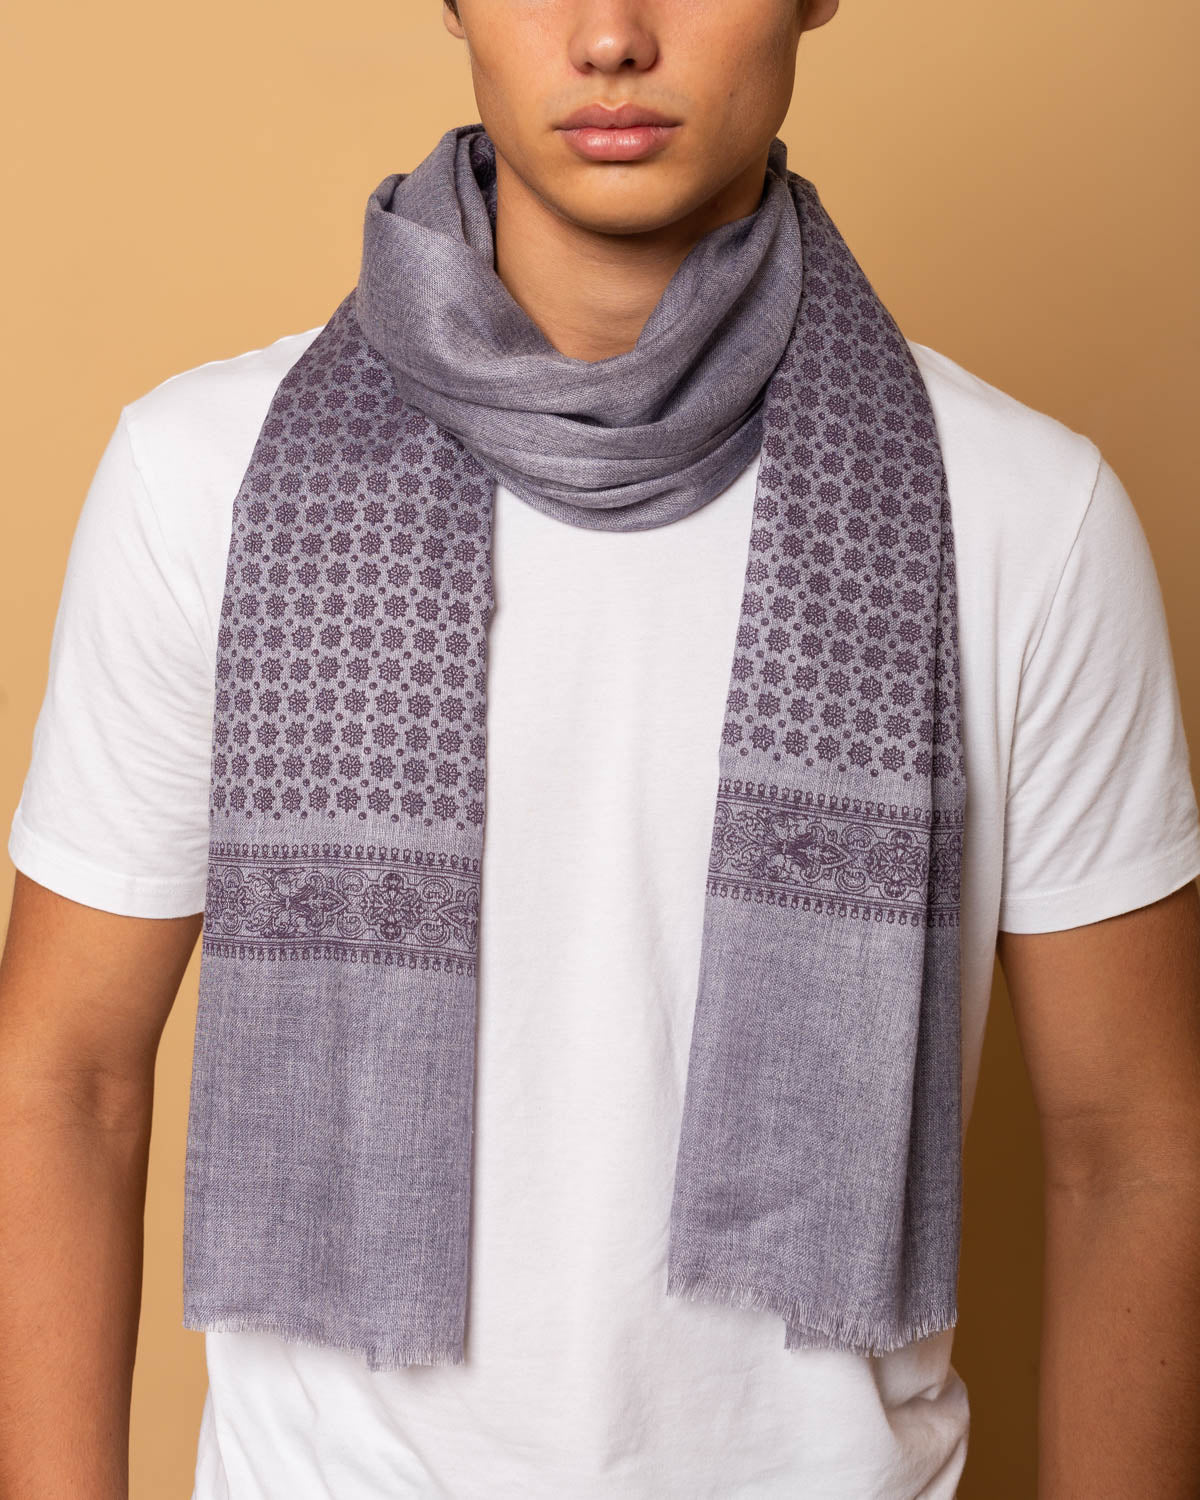 Hand-printed Wool and Modal Scarf in Topaz Purple color